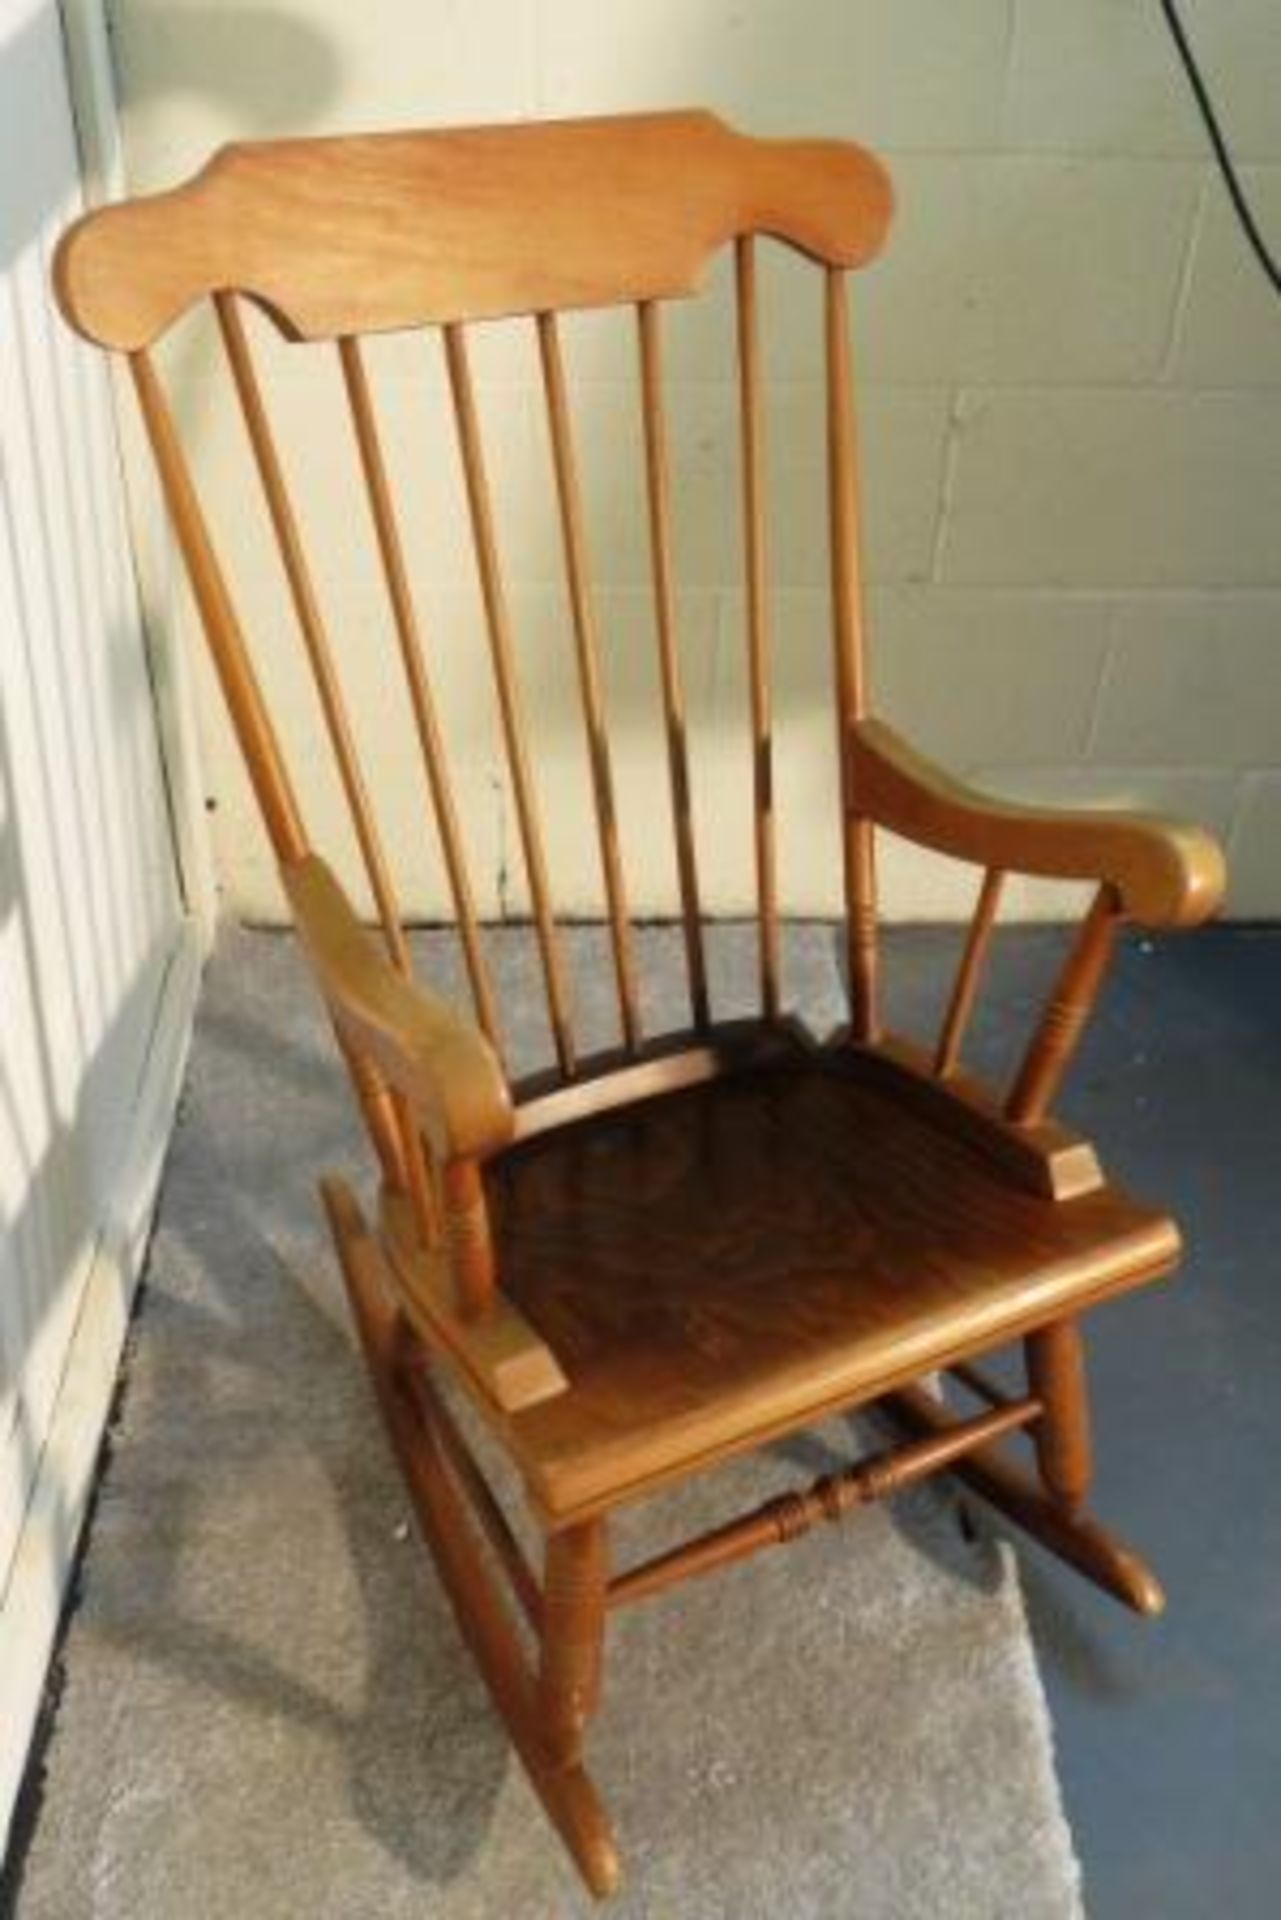 VINTAGE PINE ROCKING CHAIR - HIGH BACK SPINDLE - EXCELLENT CONDITION - Image 2 of 2